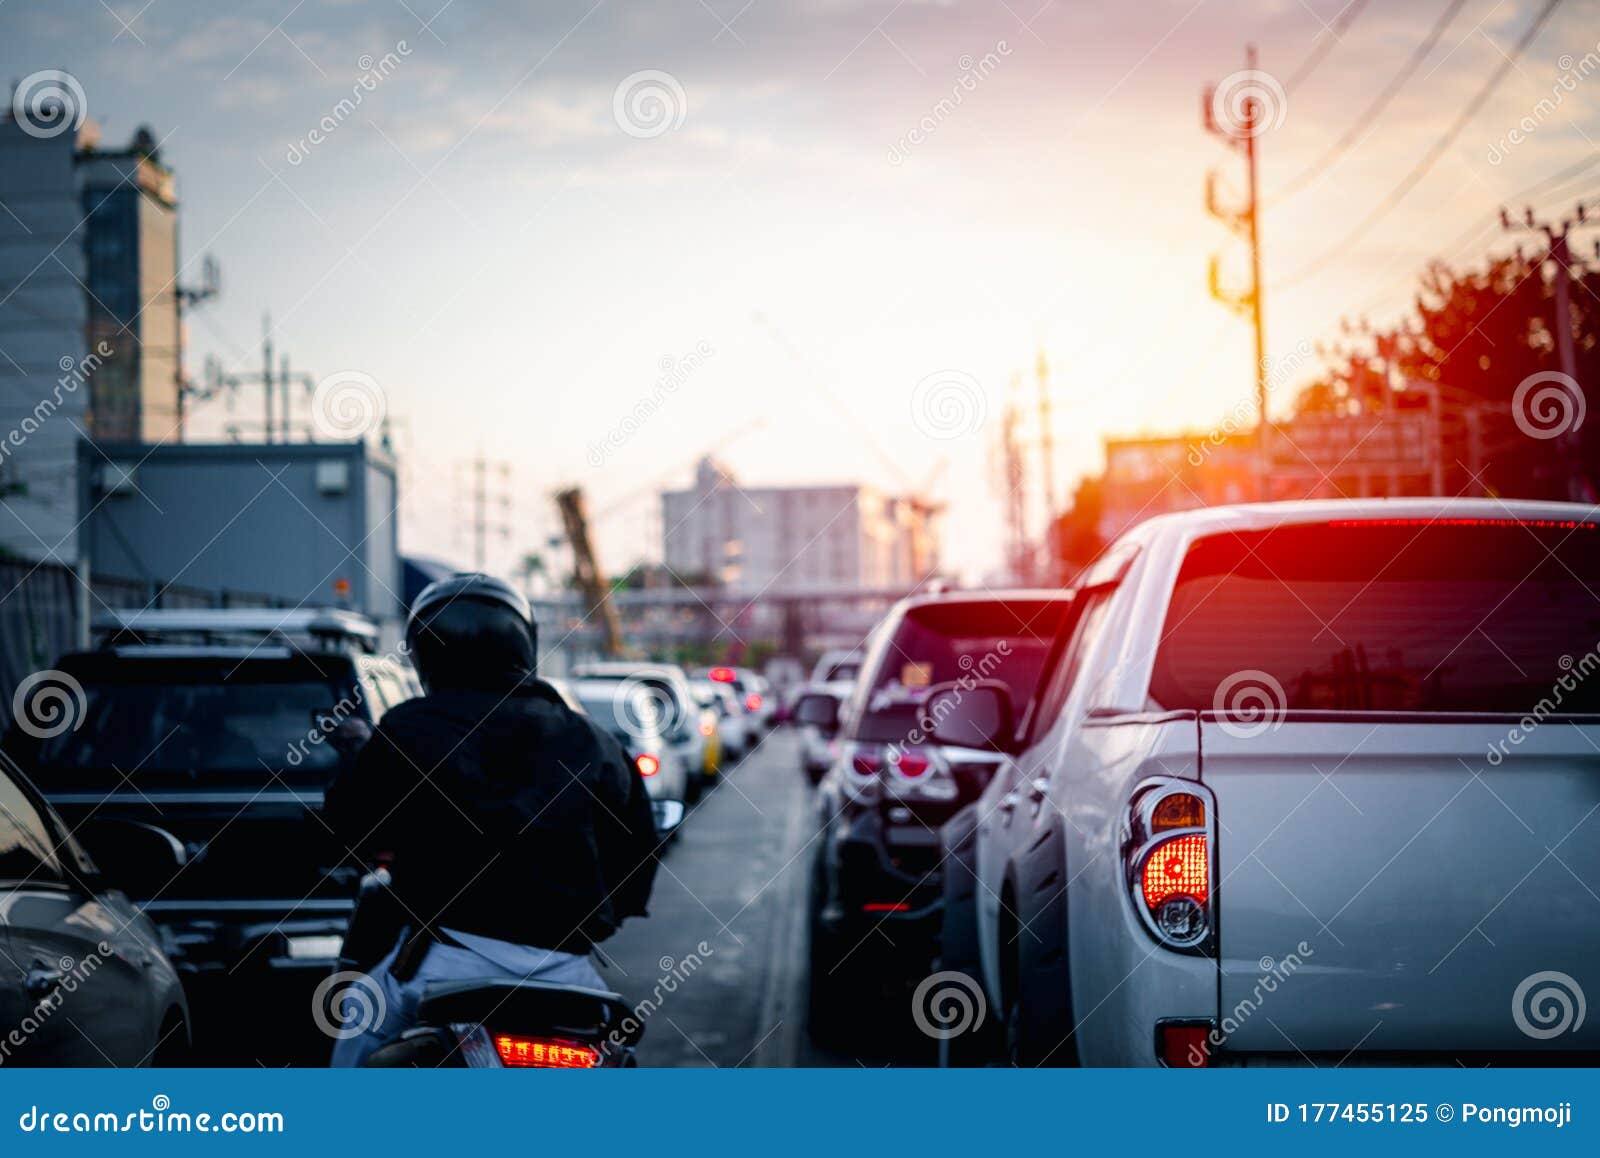 cars on busy road in the city with traffic jam